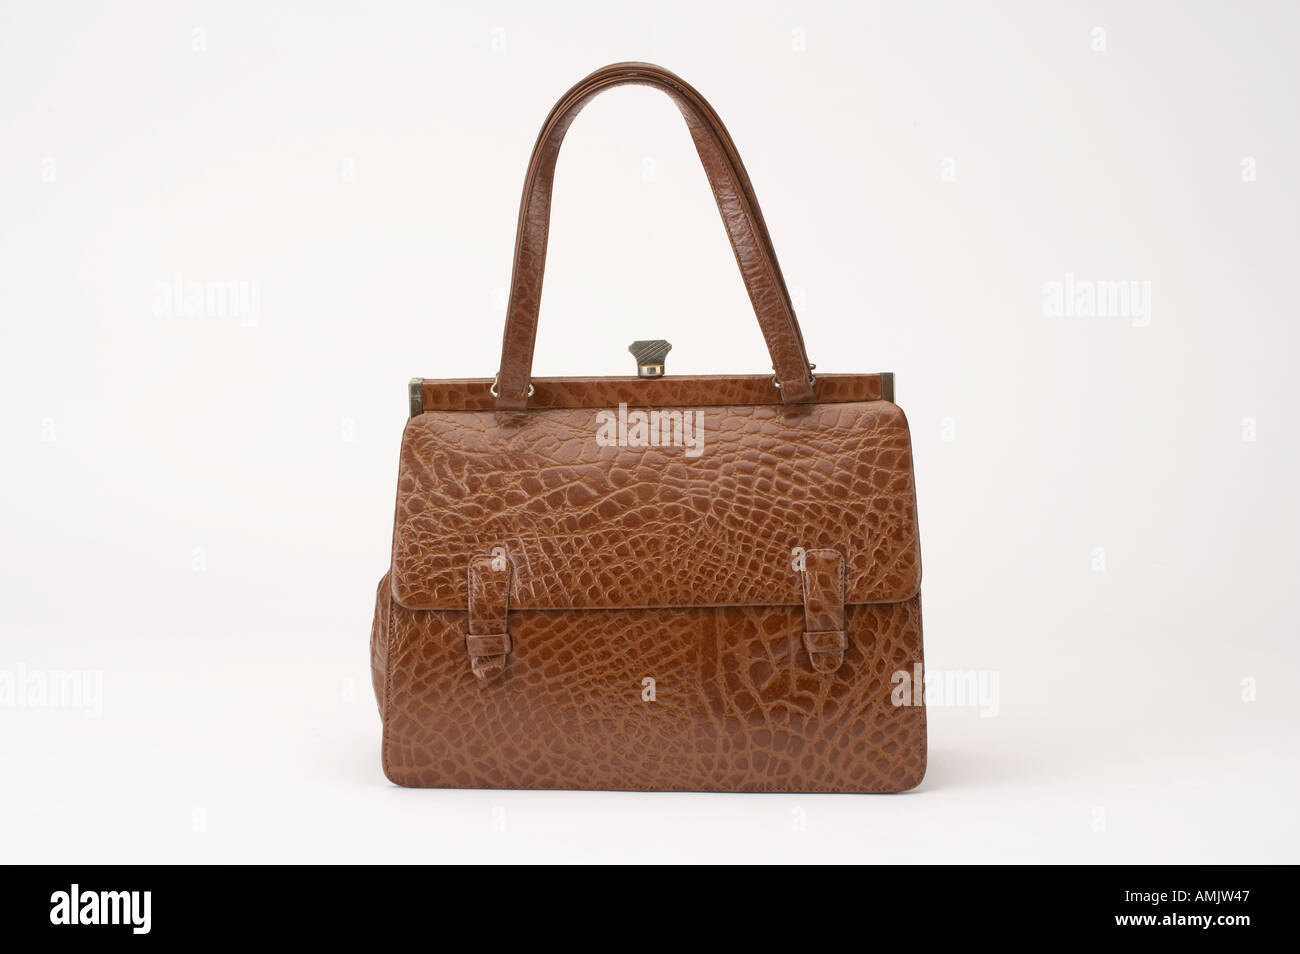 Christie's to Auction Hermés White Crocodile Himalaya Kelly Bag in Asia |  Penta